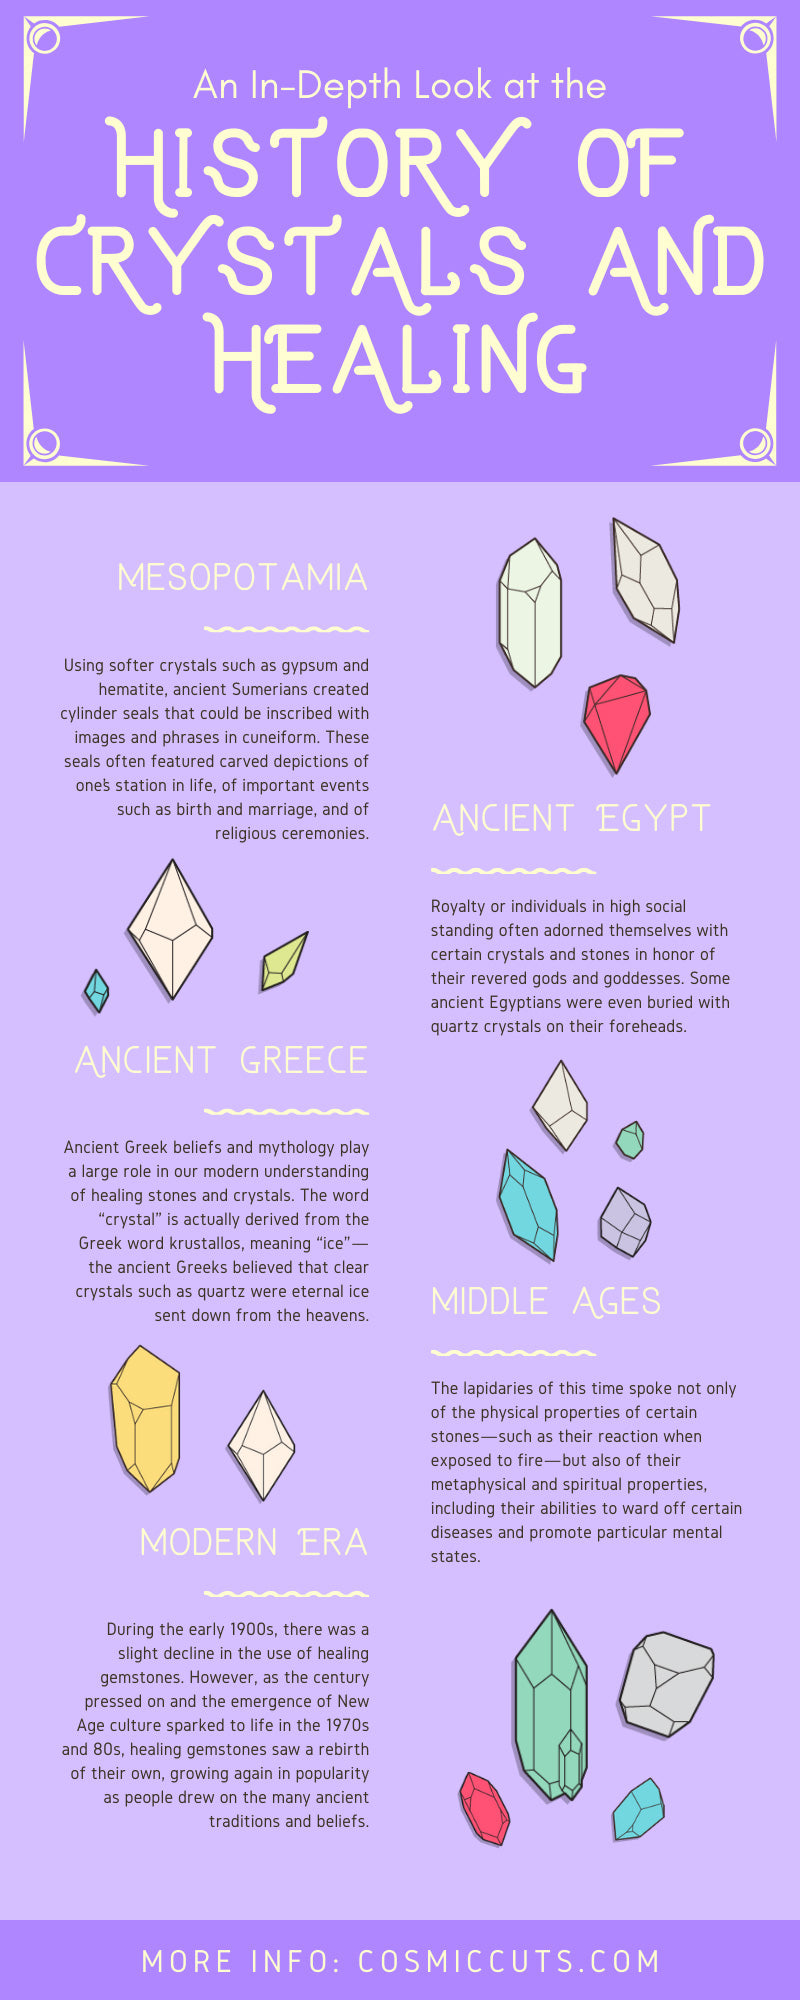 An In-Depth Look at the History of Crystals and Healing infographic